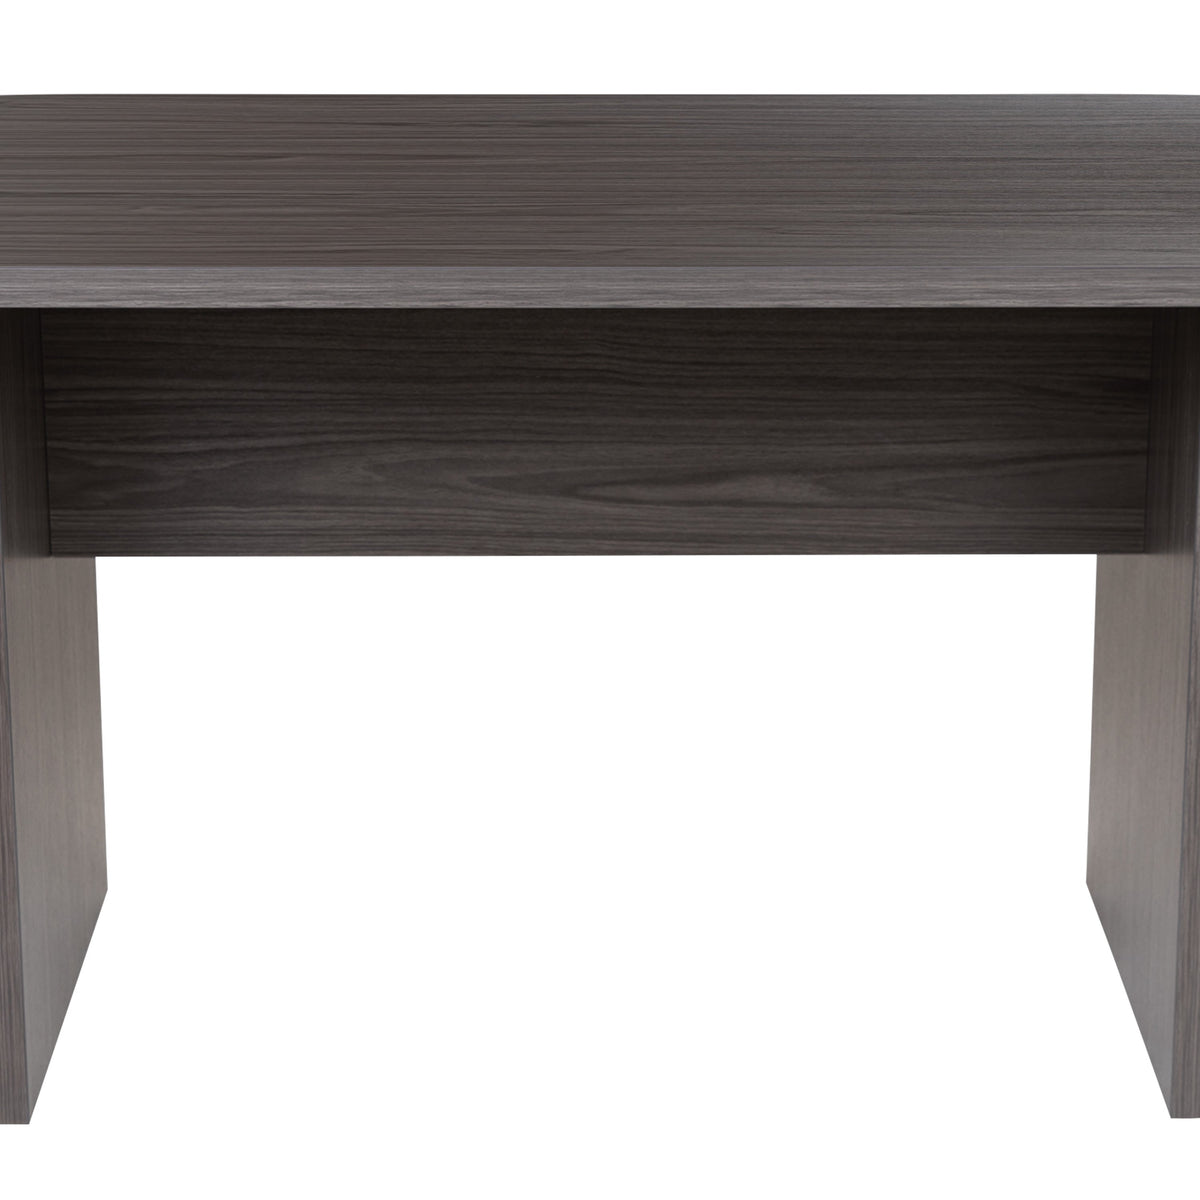 Rustic Gray |#| 6 Foot (72 inch) Classic Oval Conference Table in Rustic Gray - Meeting Table